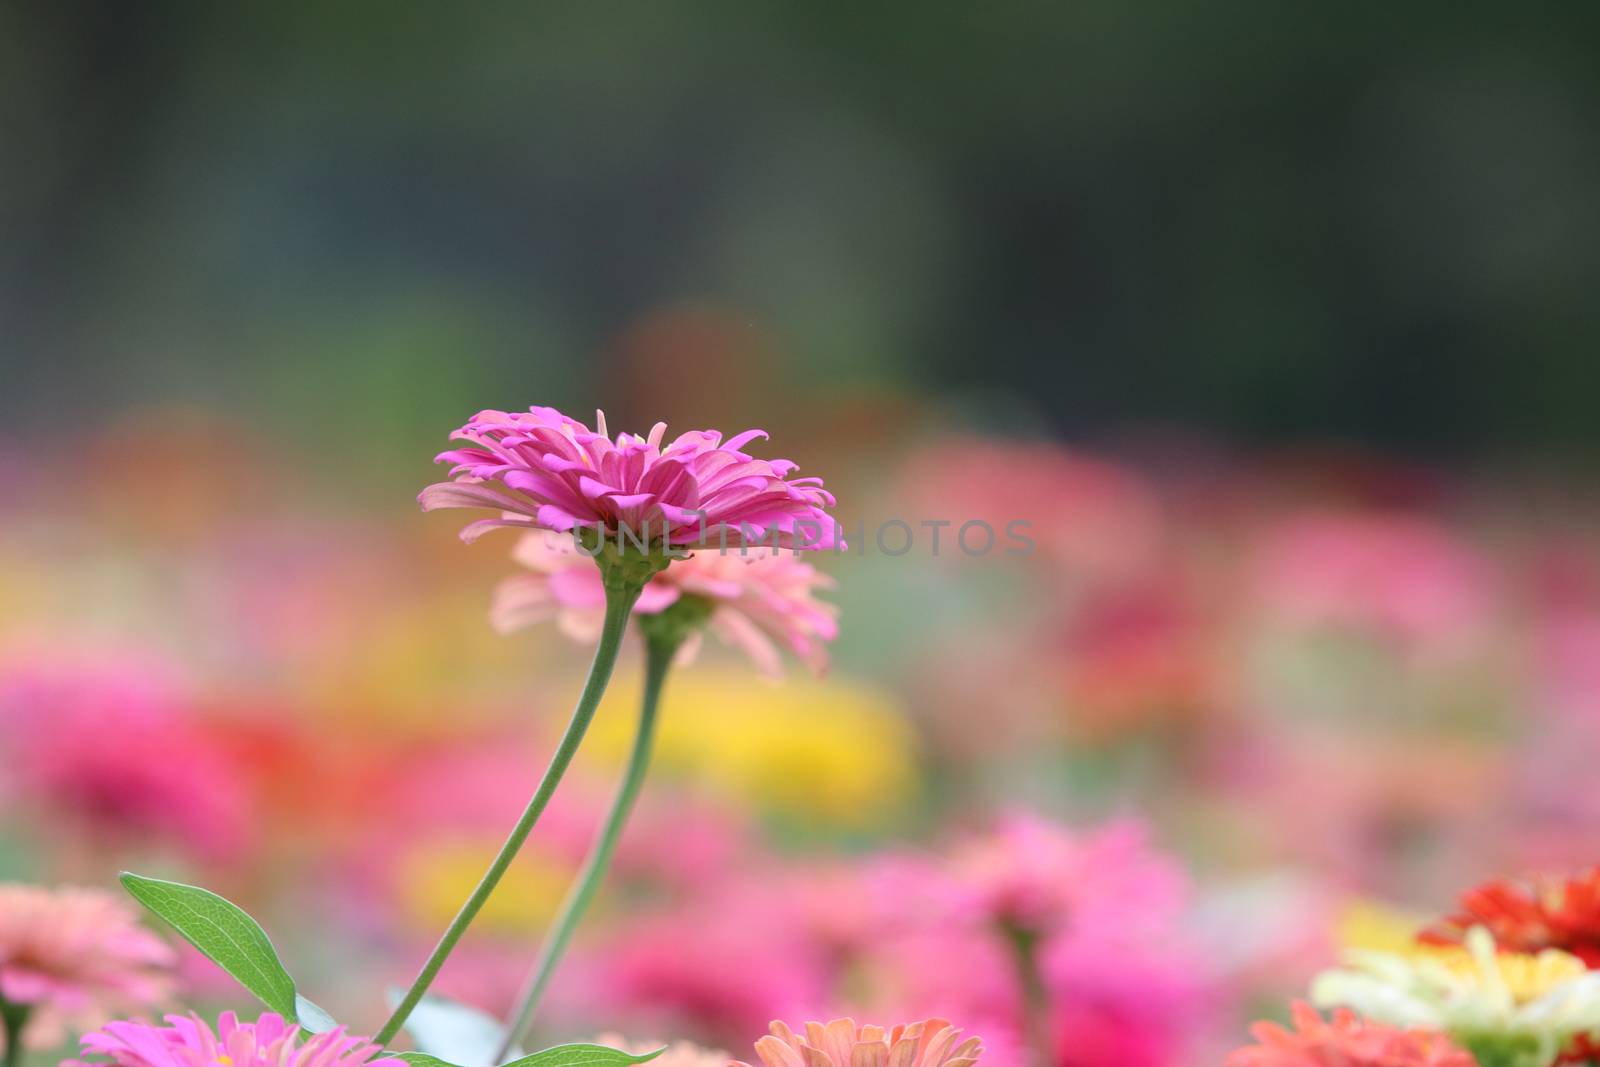 Pink Zinnia Elegans beauty in nature background soft and bright  by louisnina